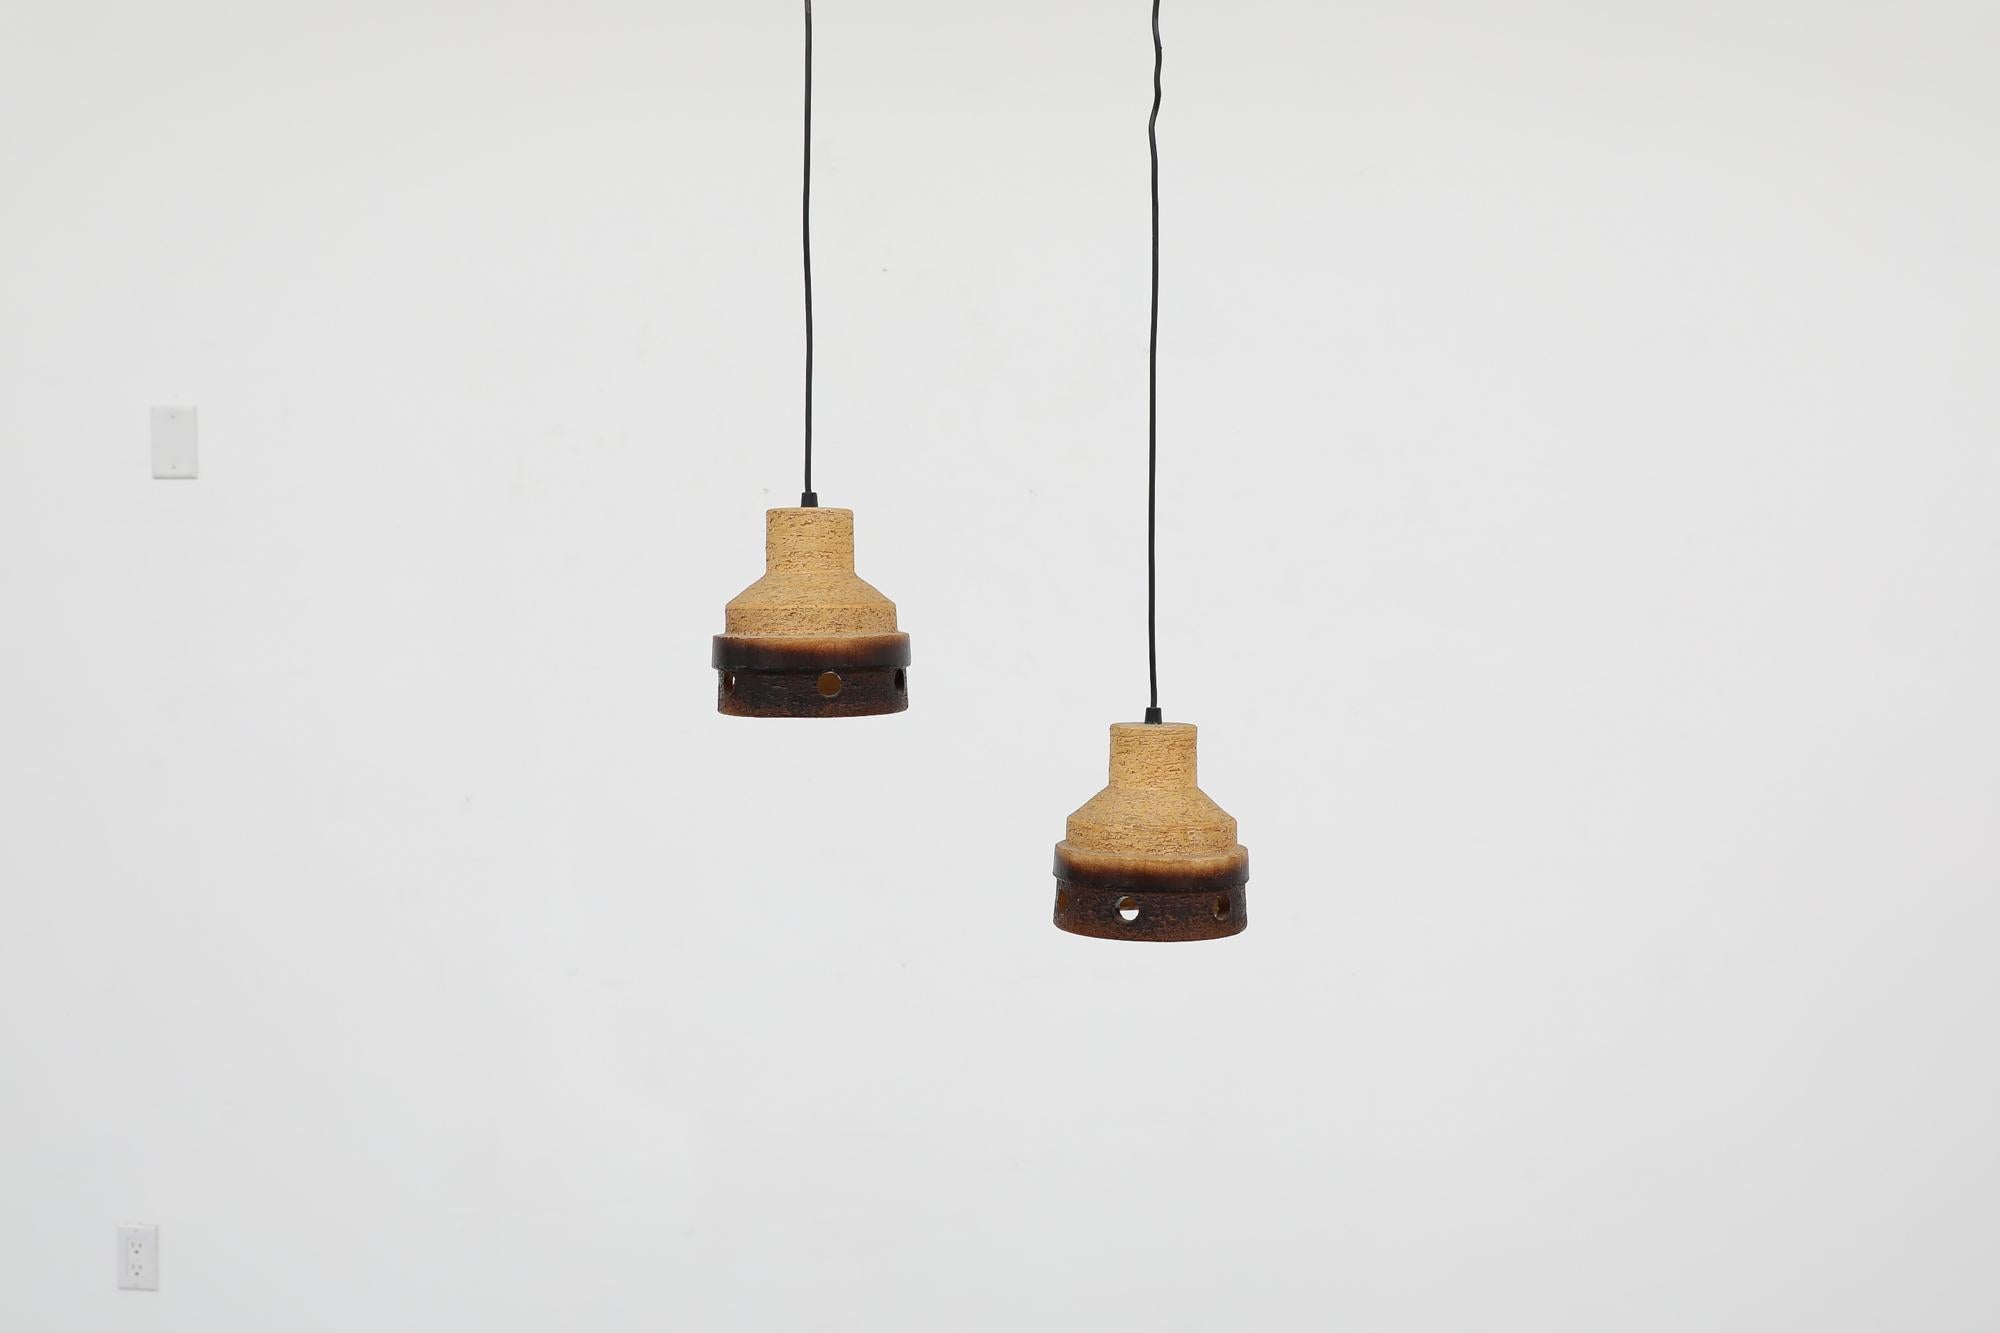 Pair of Mid-Century Dutch, Hannie Mein style, two toned ceramic pendant lamps with decorative and functional cut outs. In original condition with normal wear consistent with age and use. Priced as a pair.